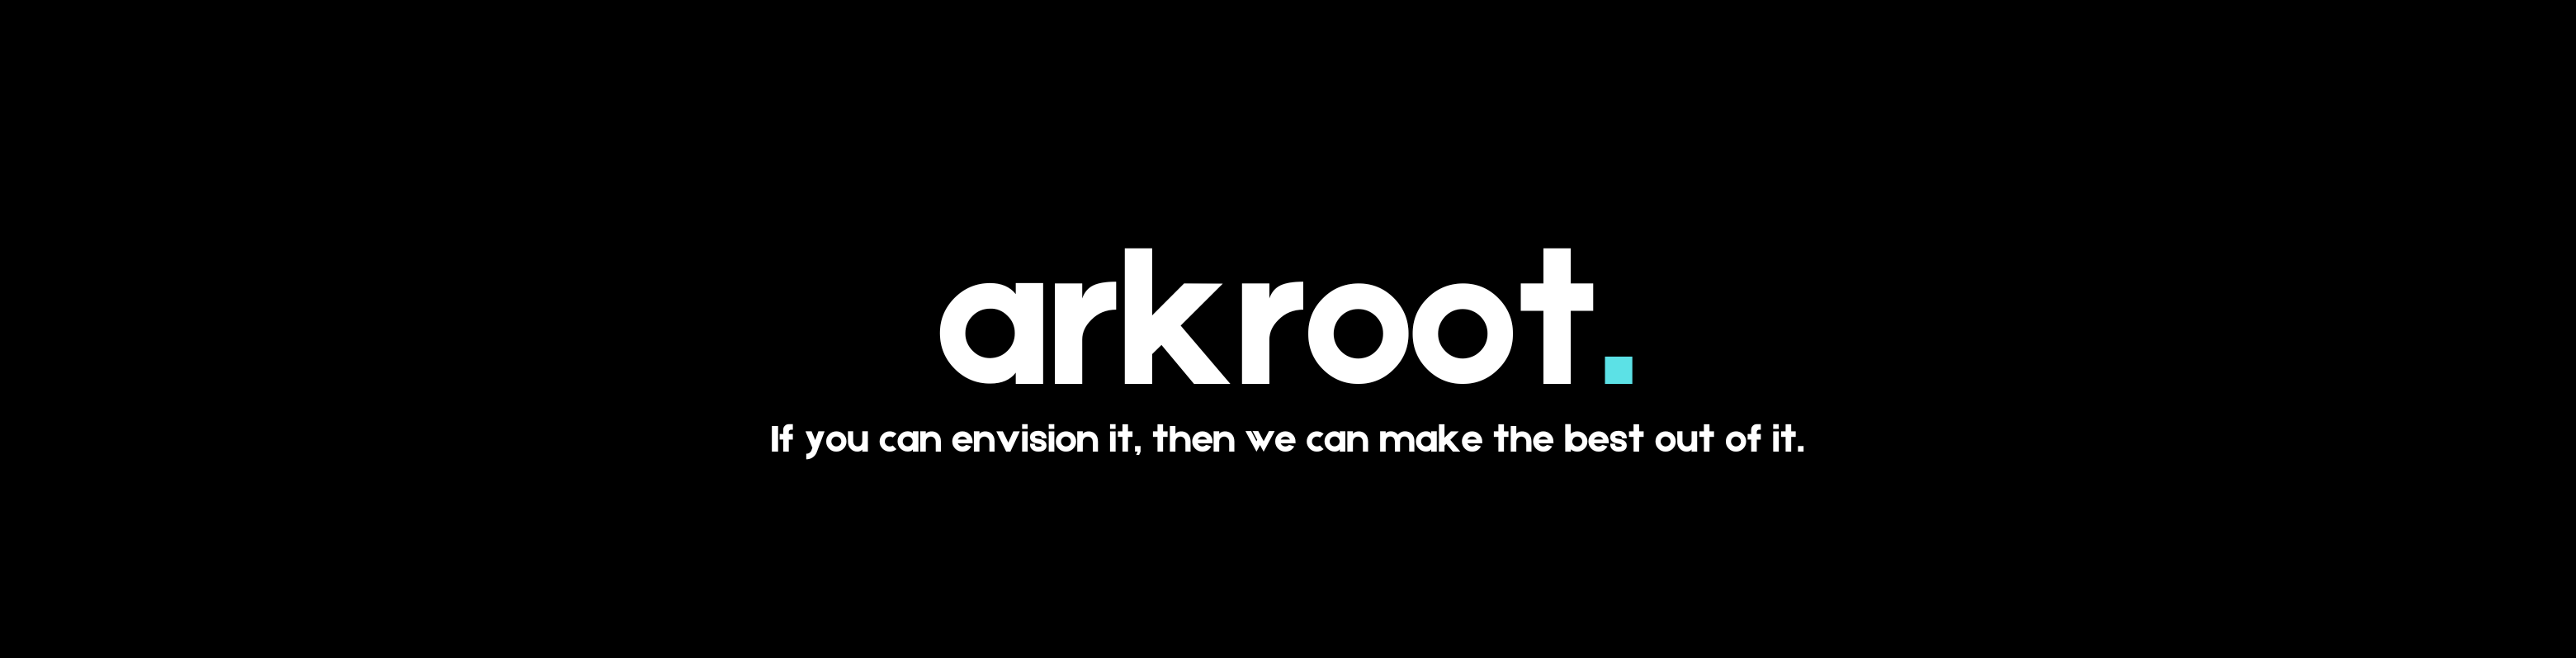 Akroot Cover